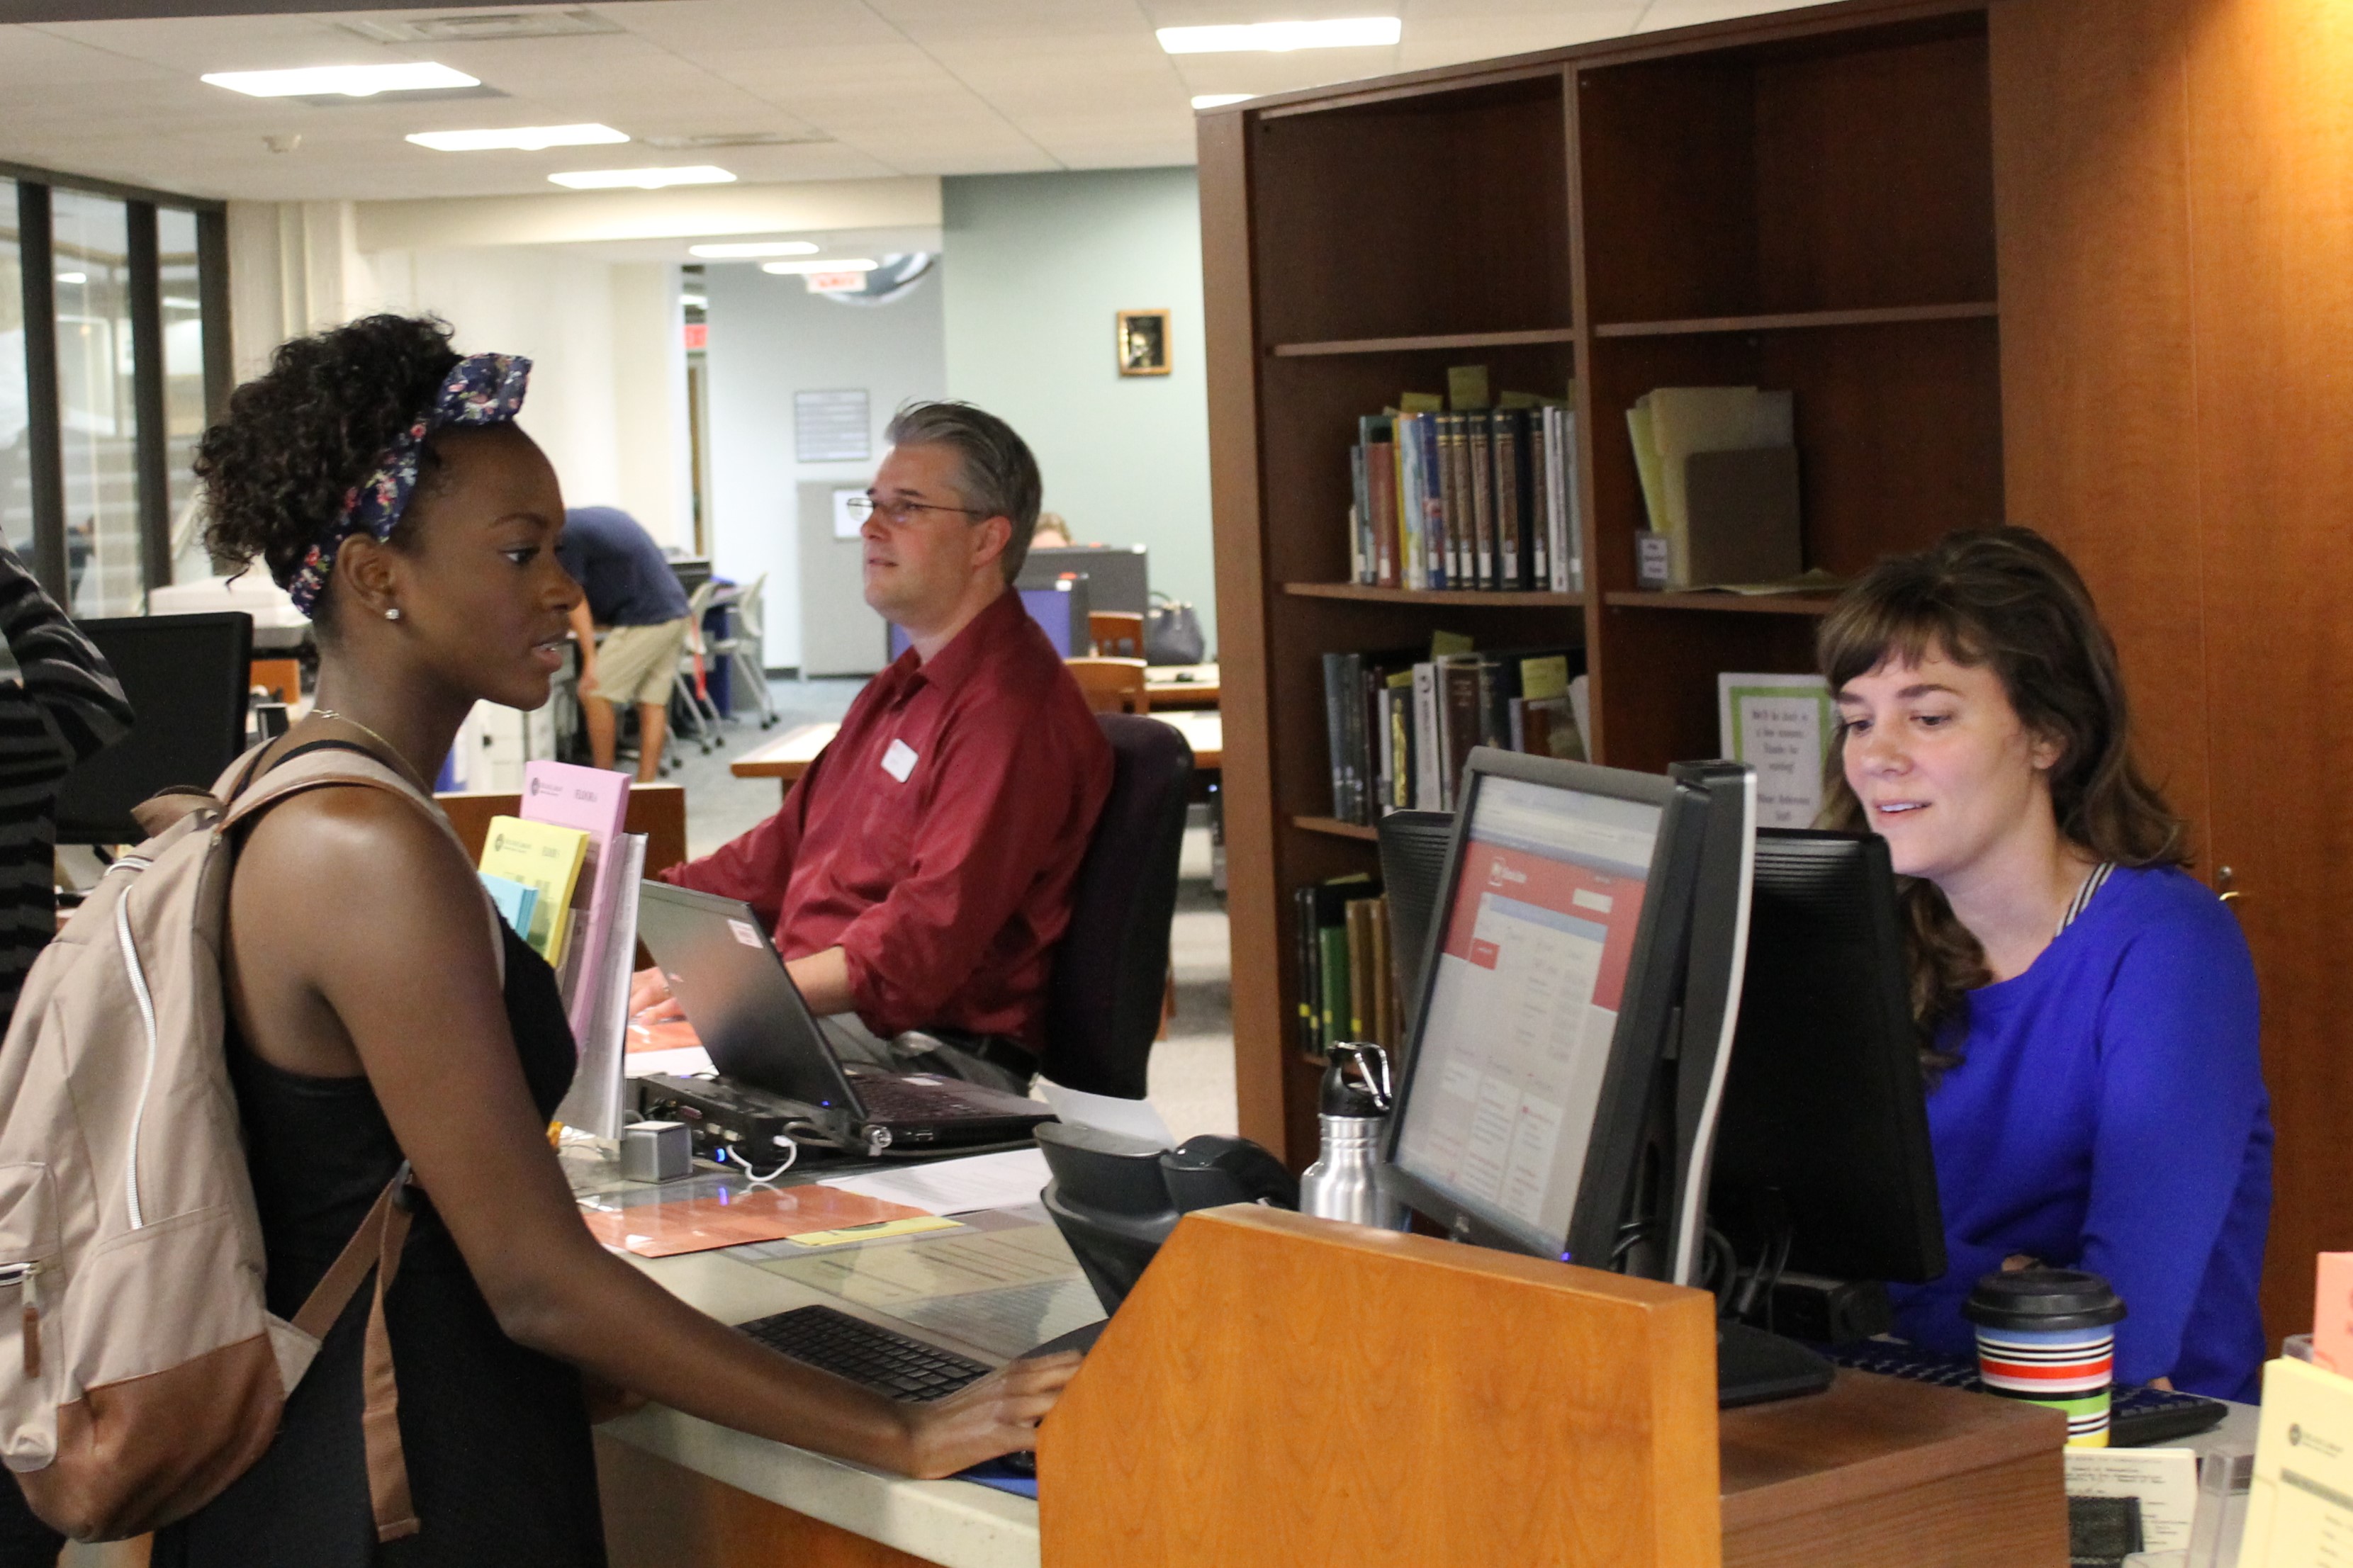 Faculty and staff at Milner Library are here to help.